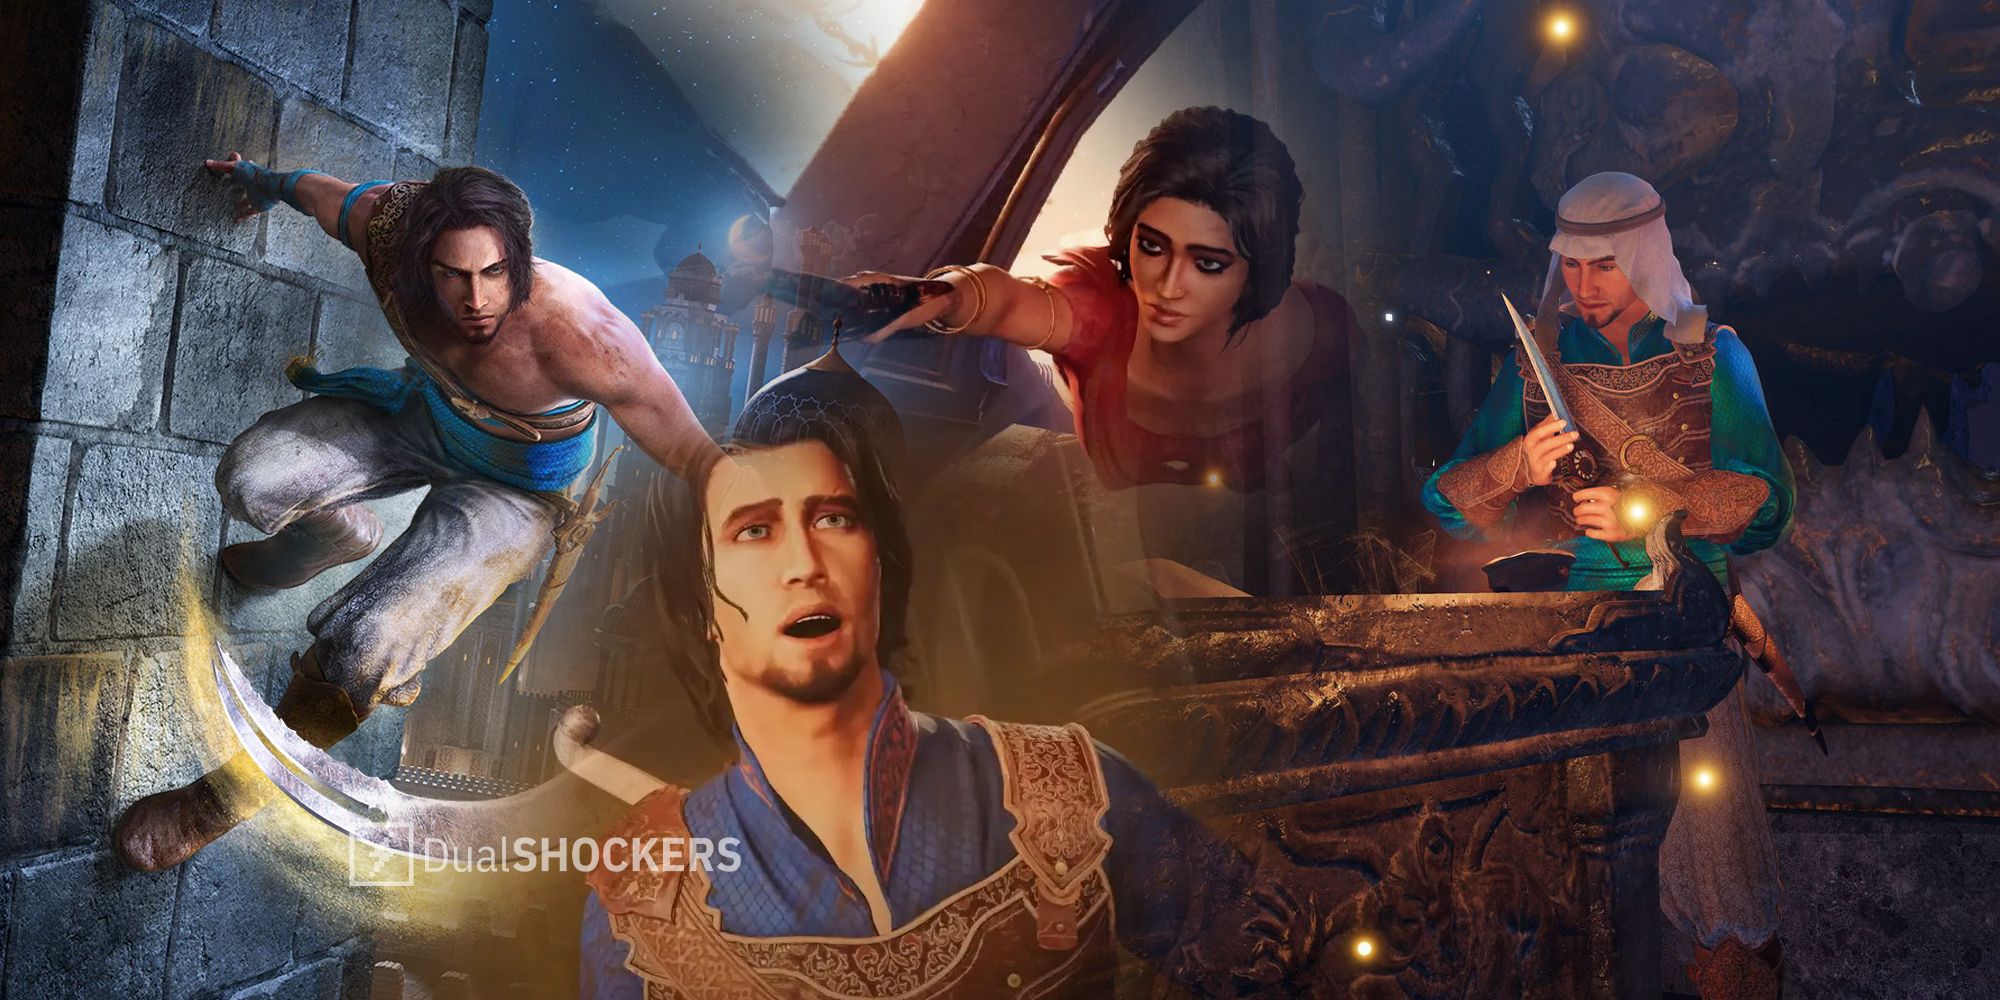 Prince of Persia: The Sands of Time remake returns to 'conception stage